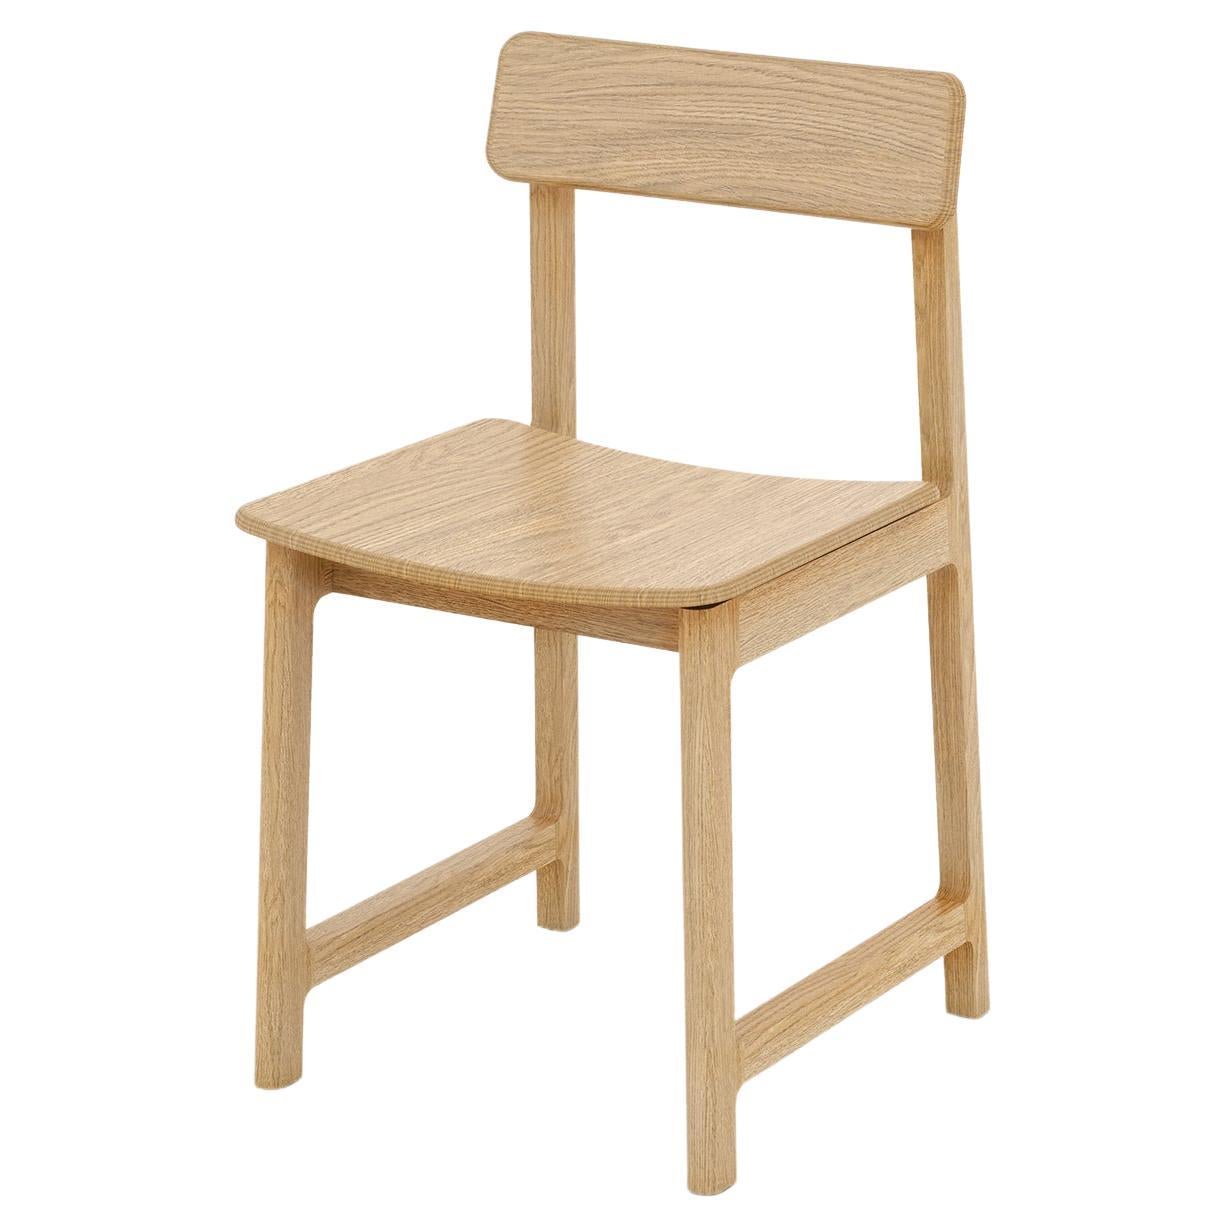 Minimalist Modern Chair in Oak Wood Frame Collection For Sale